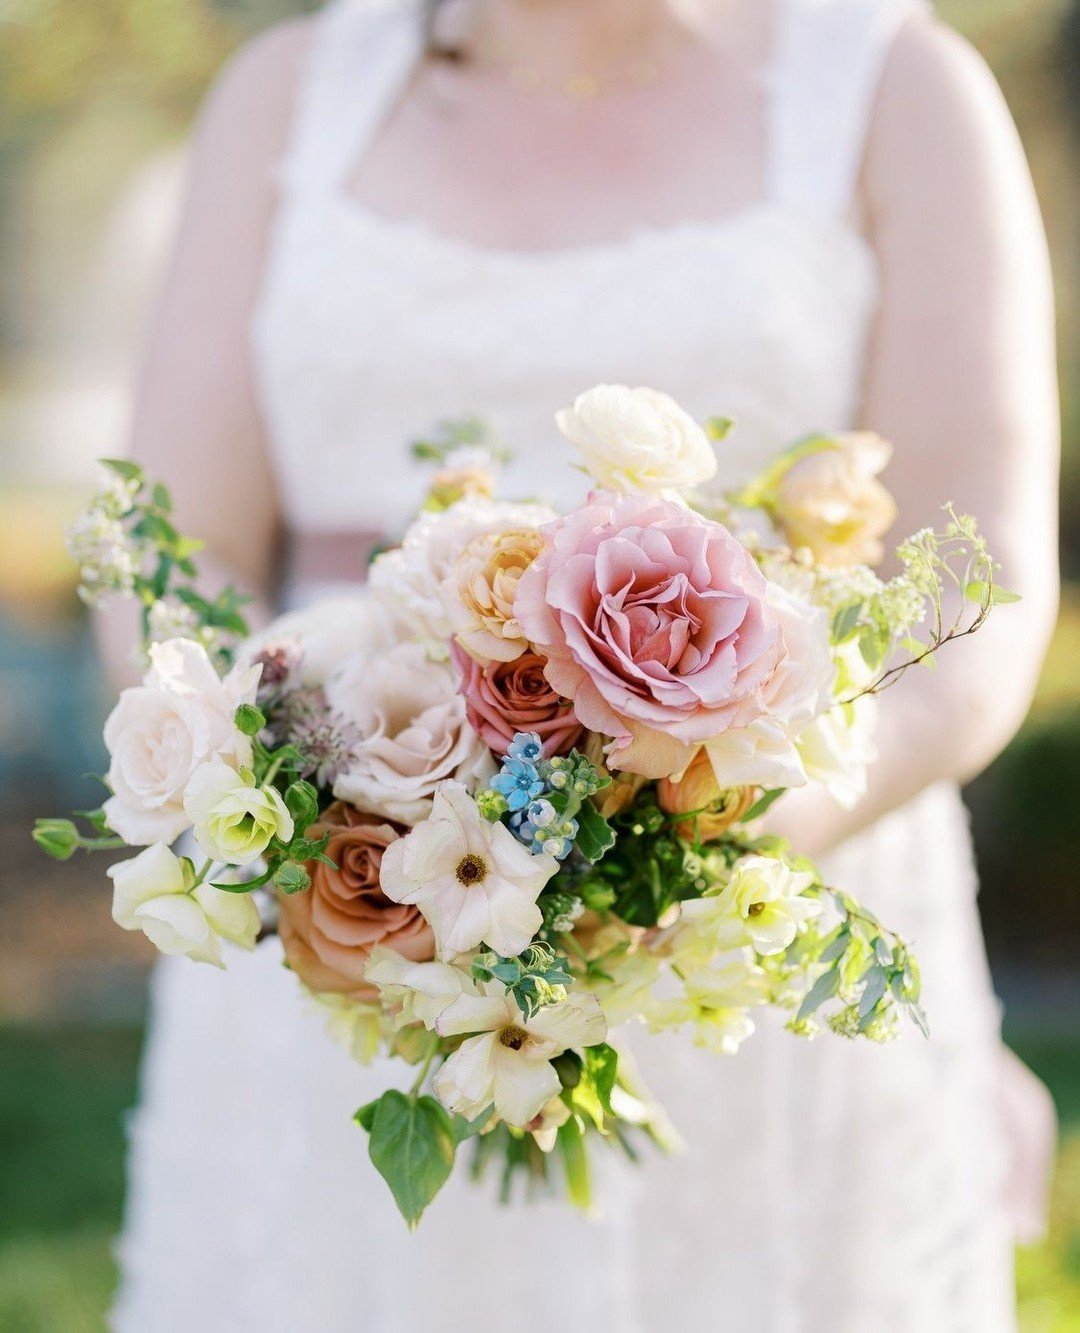 Spring has officially sprung in New England and we are so here for it! ⁠
⁠
So, let's talk bouquets, shall we? 💐⁠
⁠
From classic and elegant to wild and whimsical, there are so many stunning options to choose from when it comes to your wedding day bl